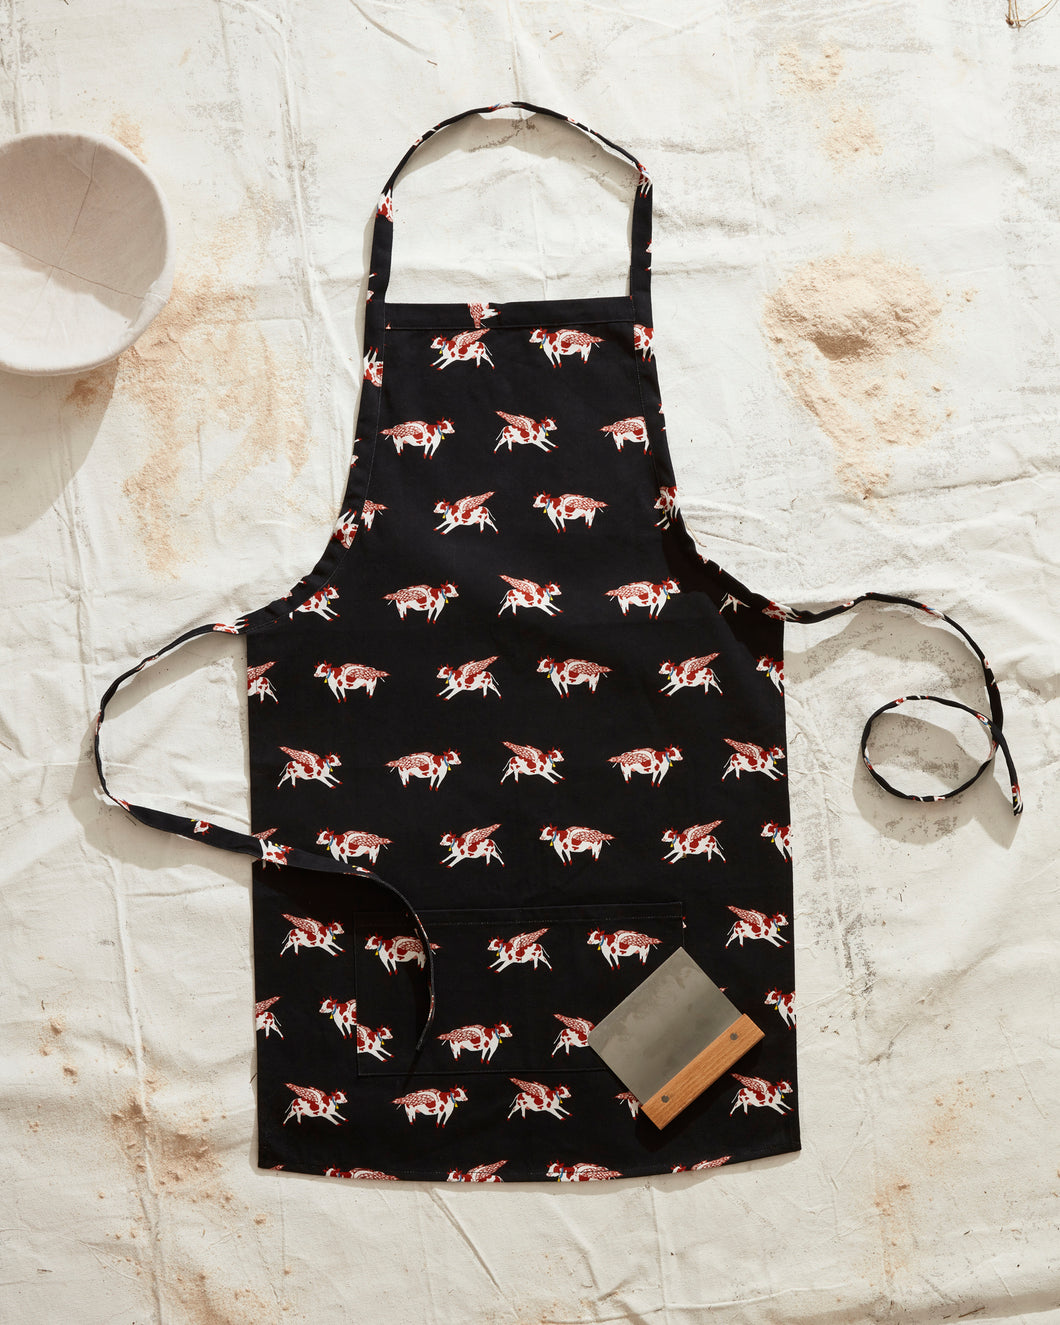 Flying Cows Cotton Canvas Apron